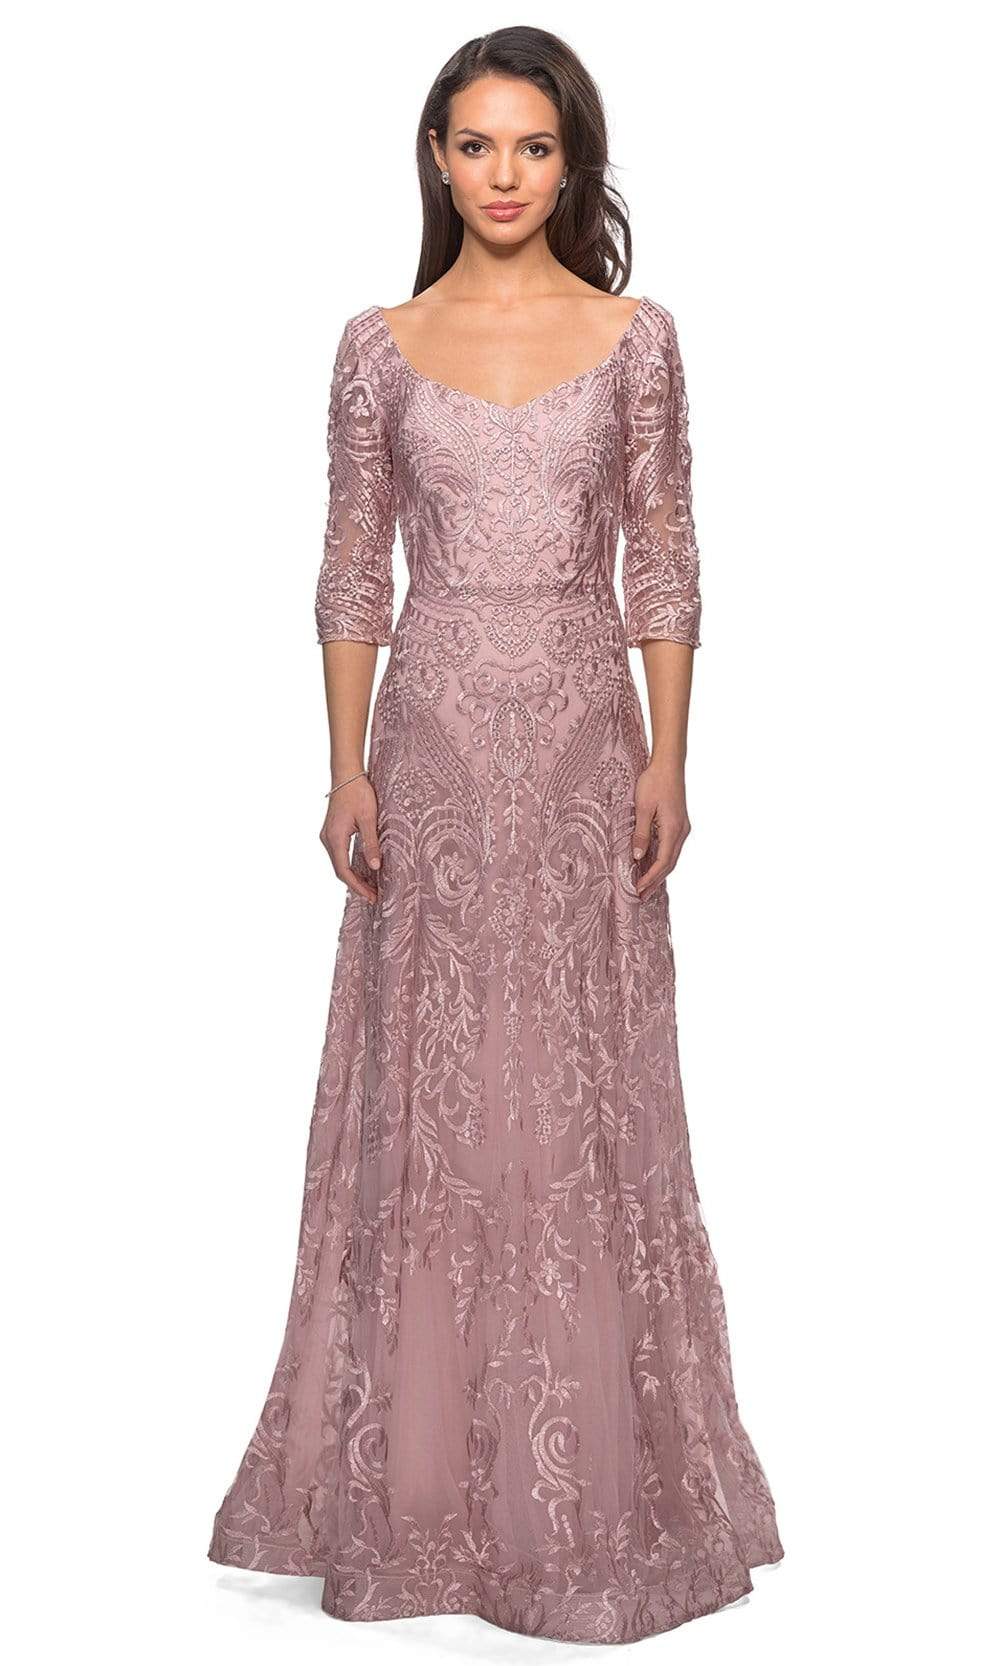 Image of La Femme - 27949 Embroidered Lace Overlay A-Line Gown